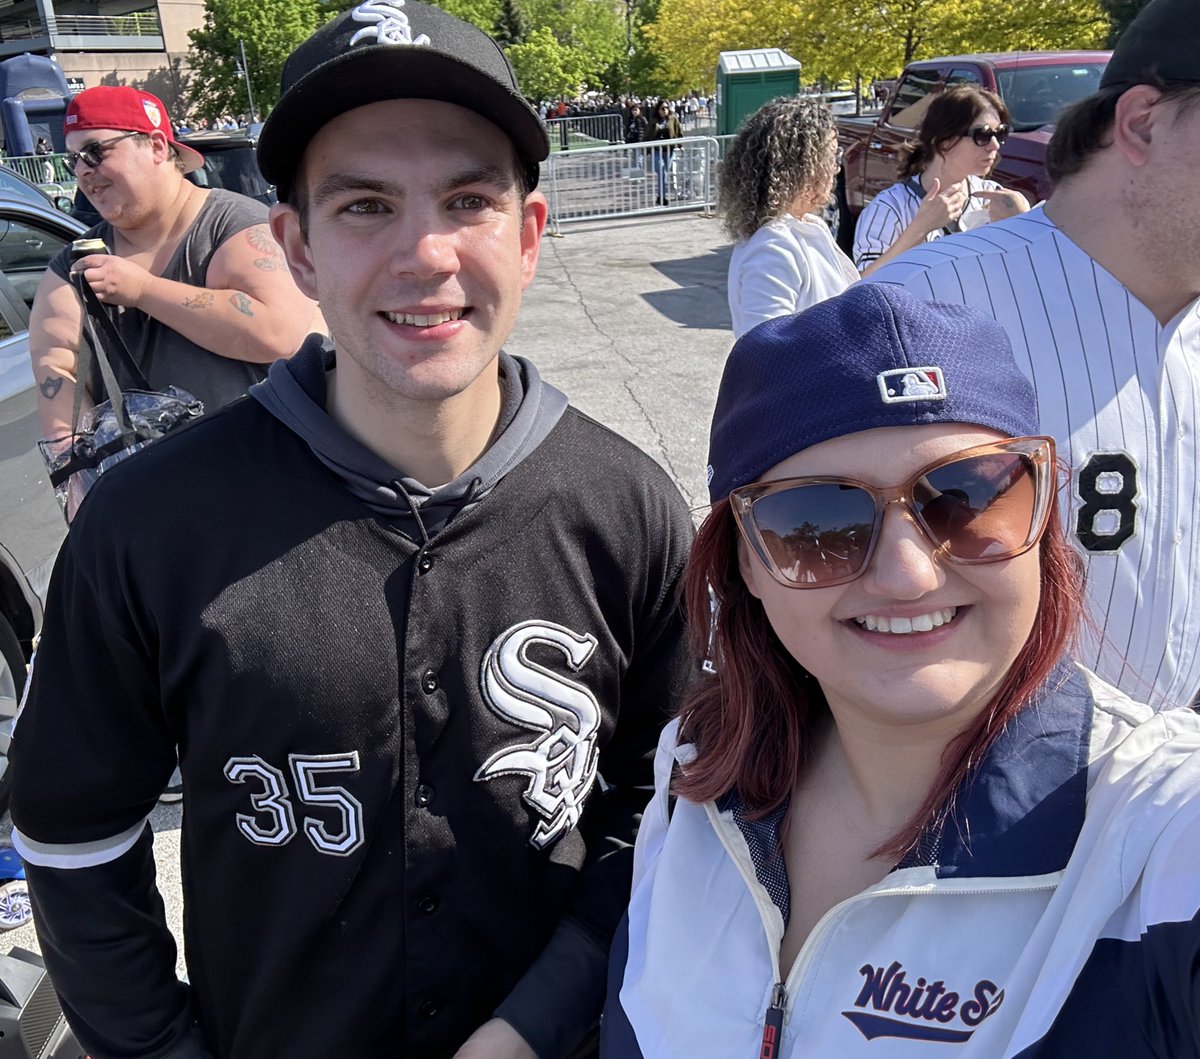 Reporting for duty at the White Sox Tailgate! @PinwheelsIvyPod @sportsmockery